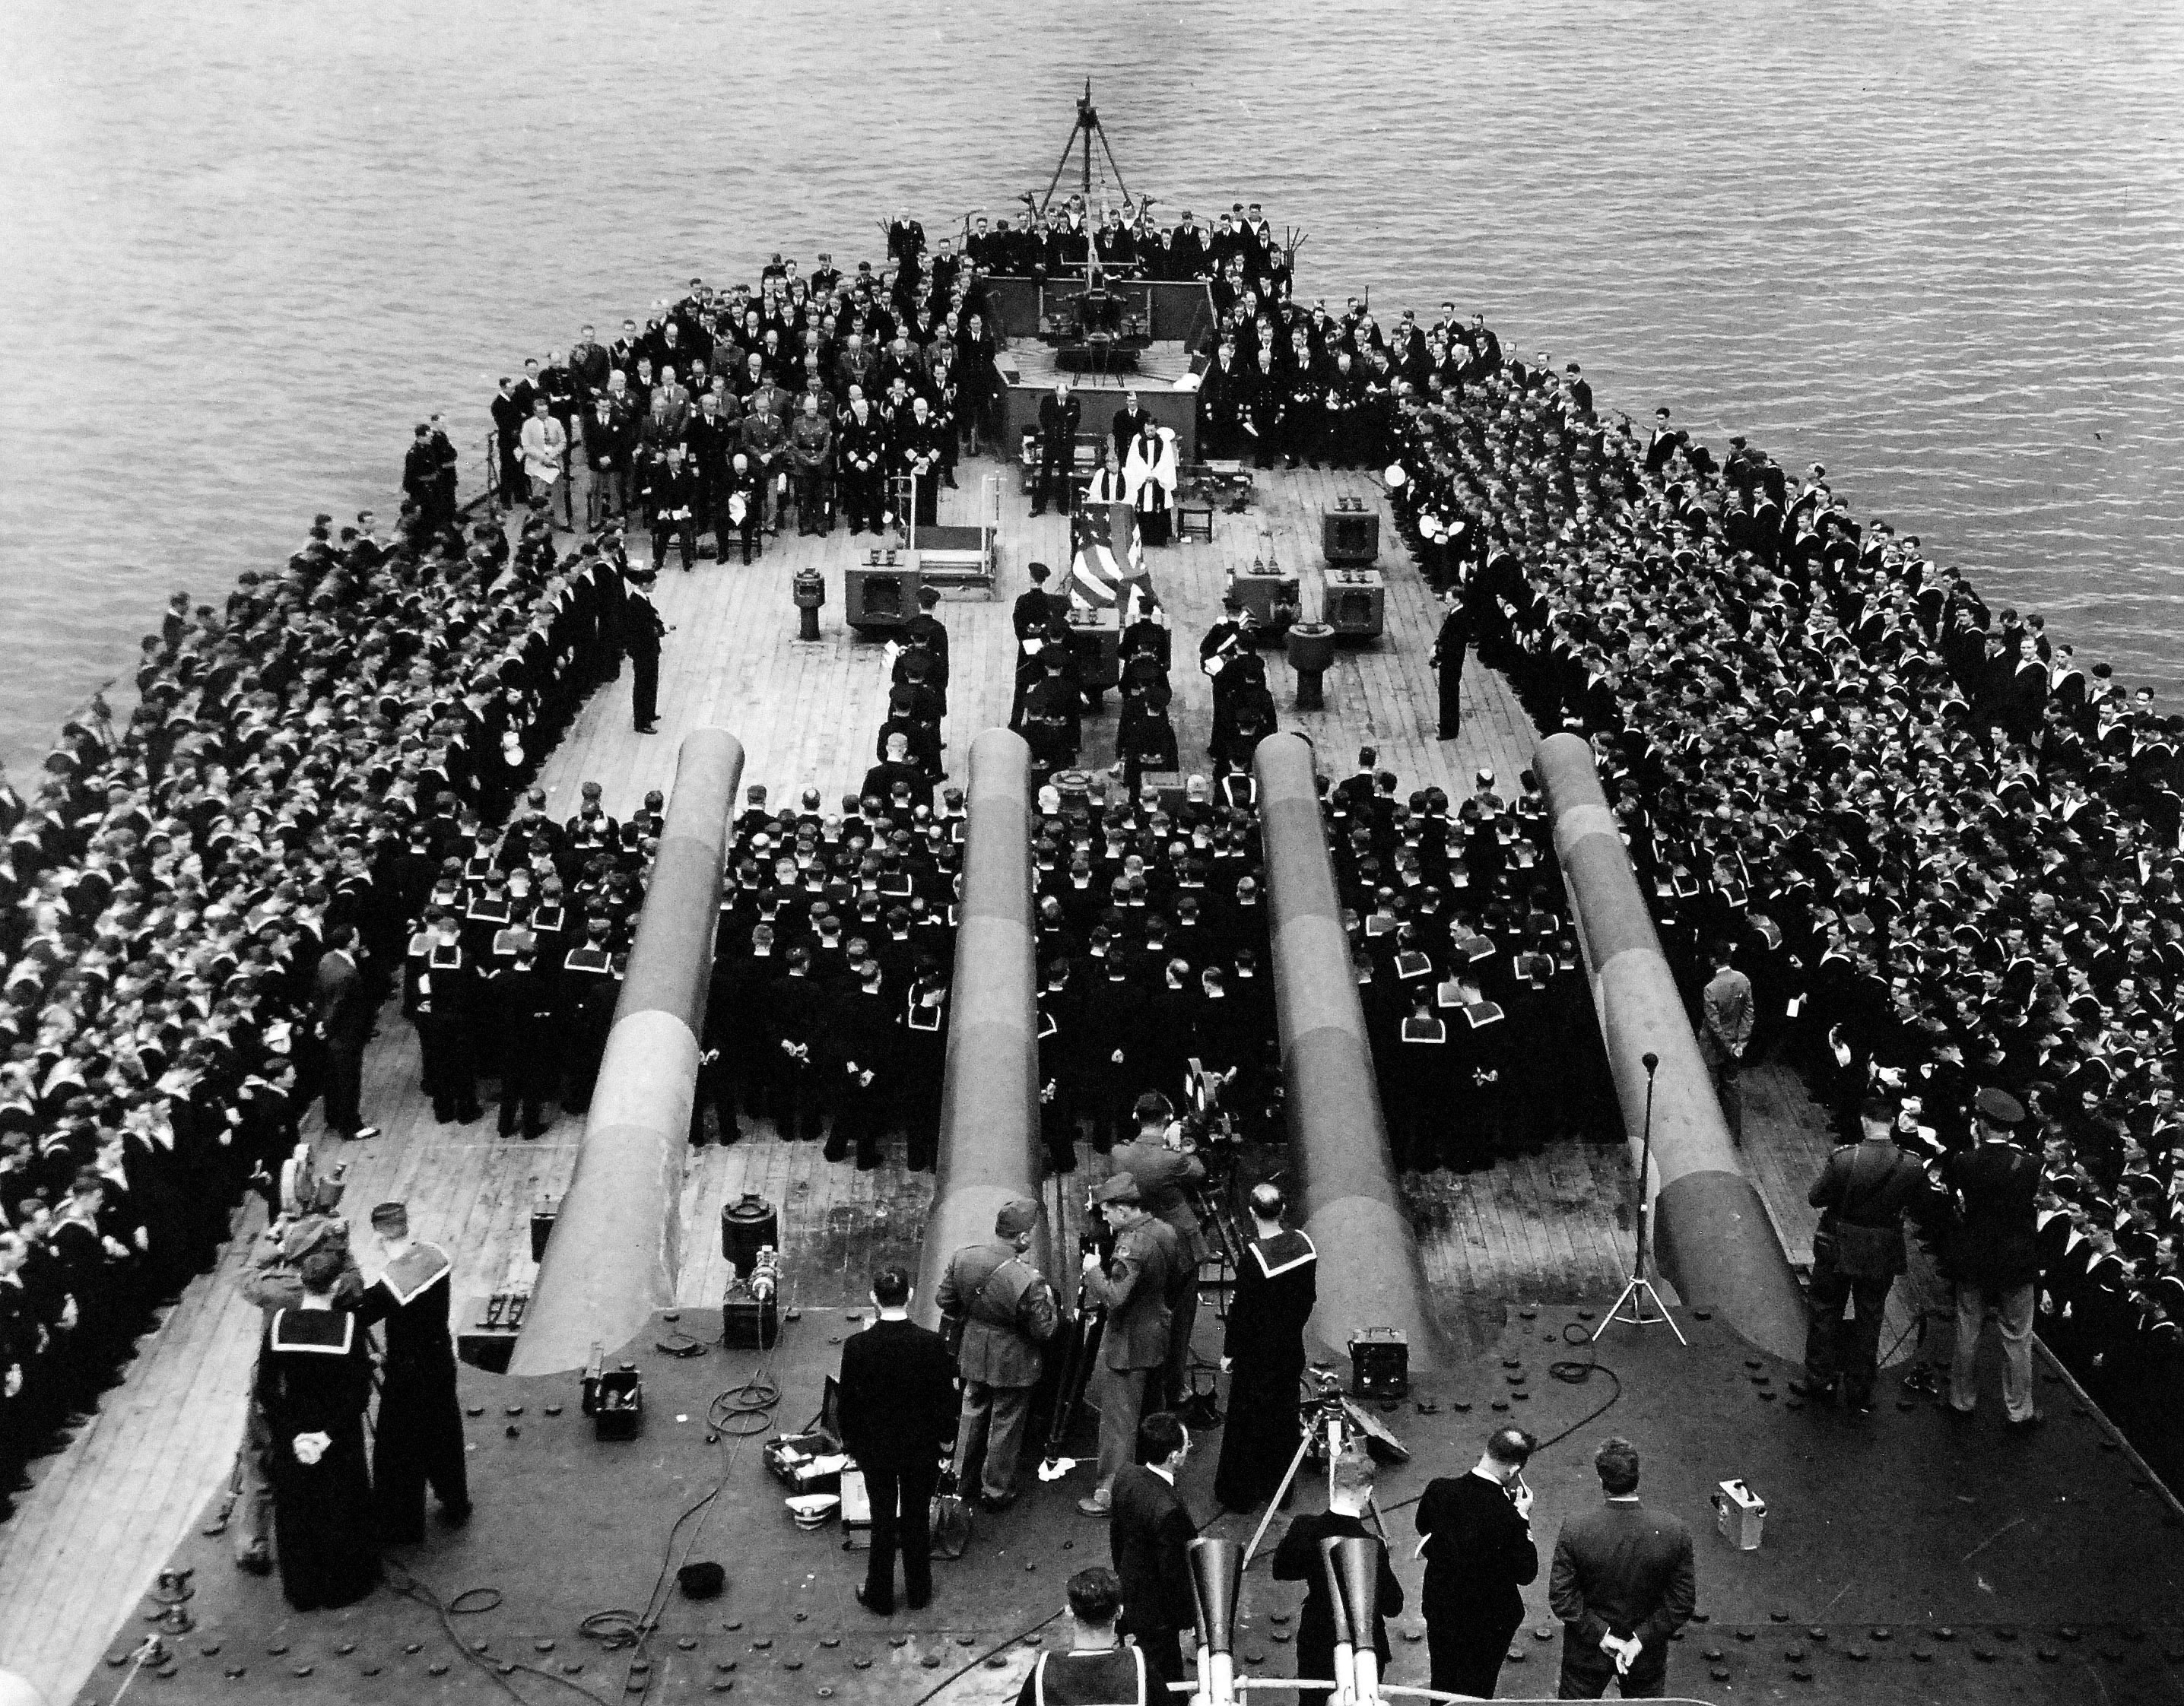 Religious services on the fantail of HMS Prince of Wales during the Atlantic Conference, Placentia Bay, Newfoundland, 10 Aug 1941. Note Prince of Wales’ 10-inch guns and Roosevelt and Churchill seated to the left.